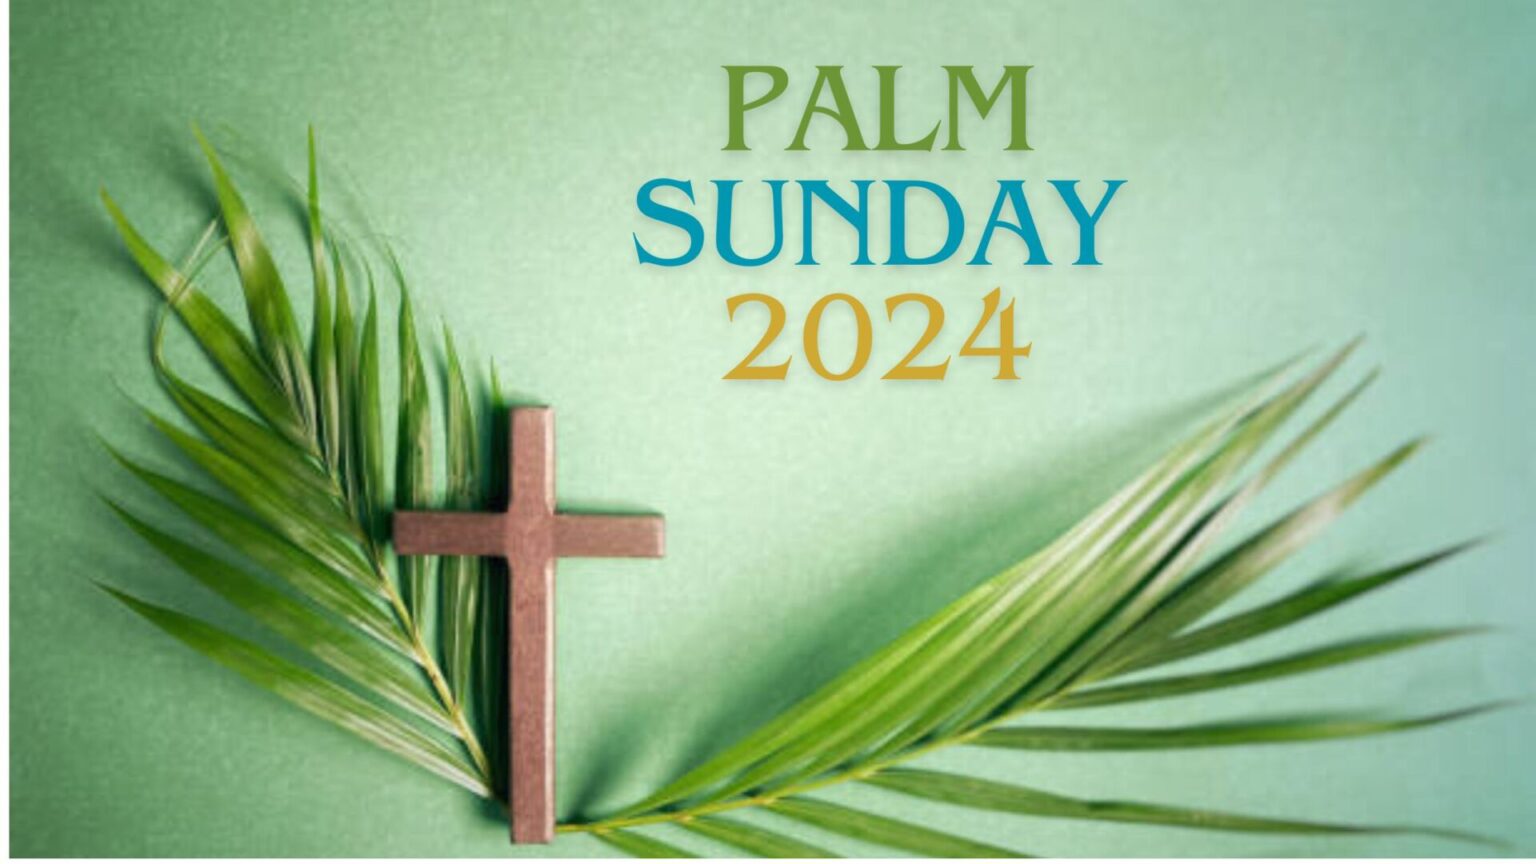 "Palm Sunday 2024: Welcoming the King of Kings with Reverence and Joy"